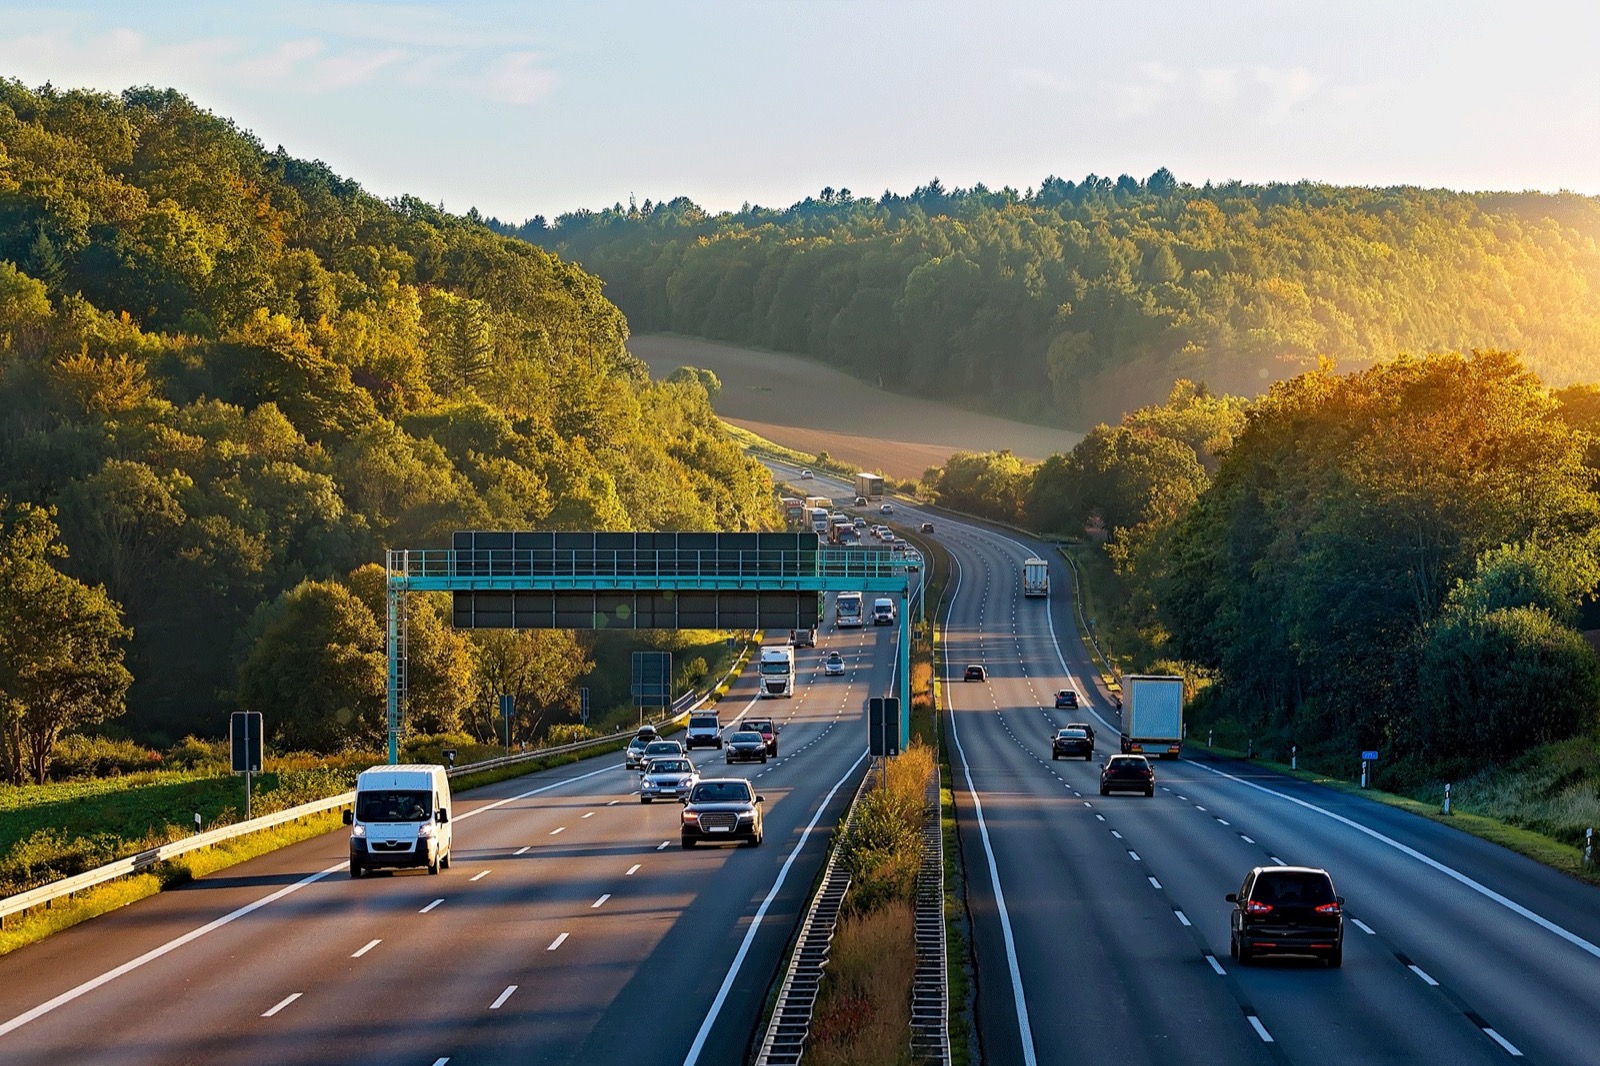 If You Get 17/24 on This Quiz, You’re a Geography Whiz Autobahn Highway Road, Germany